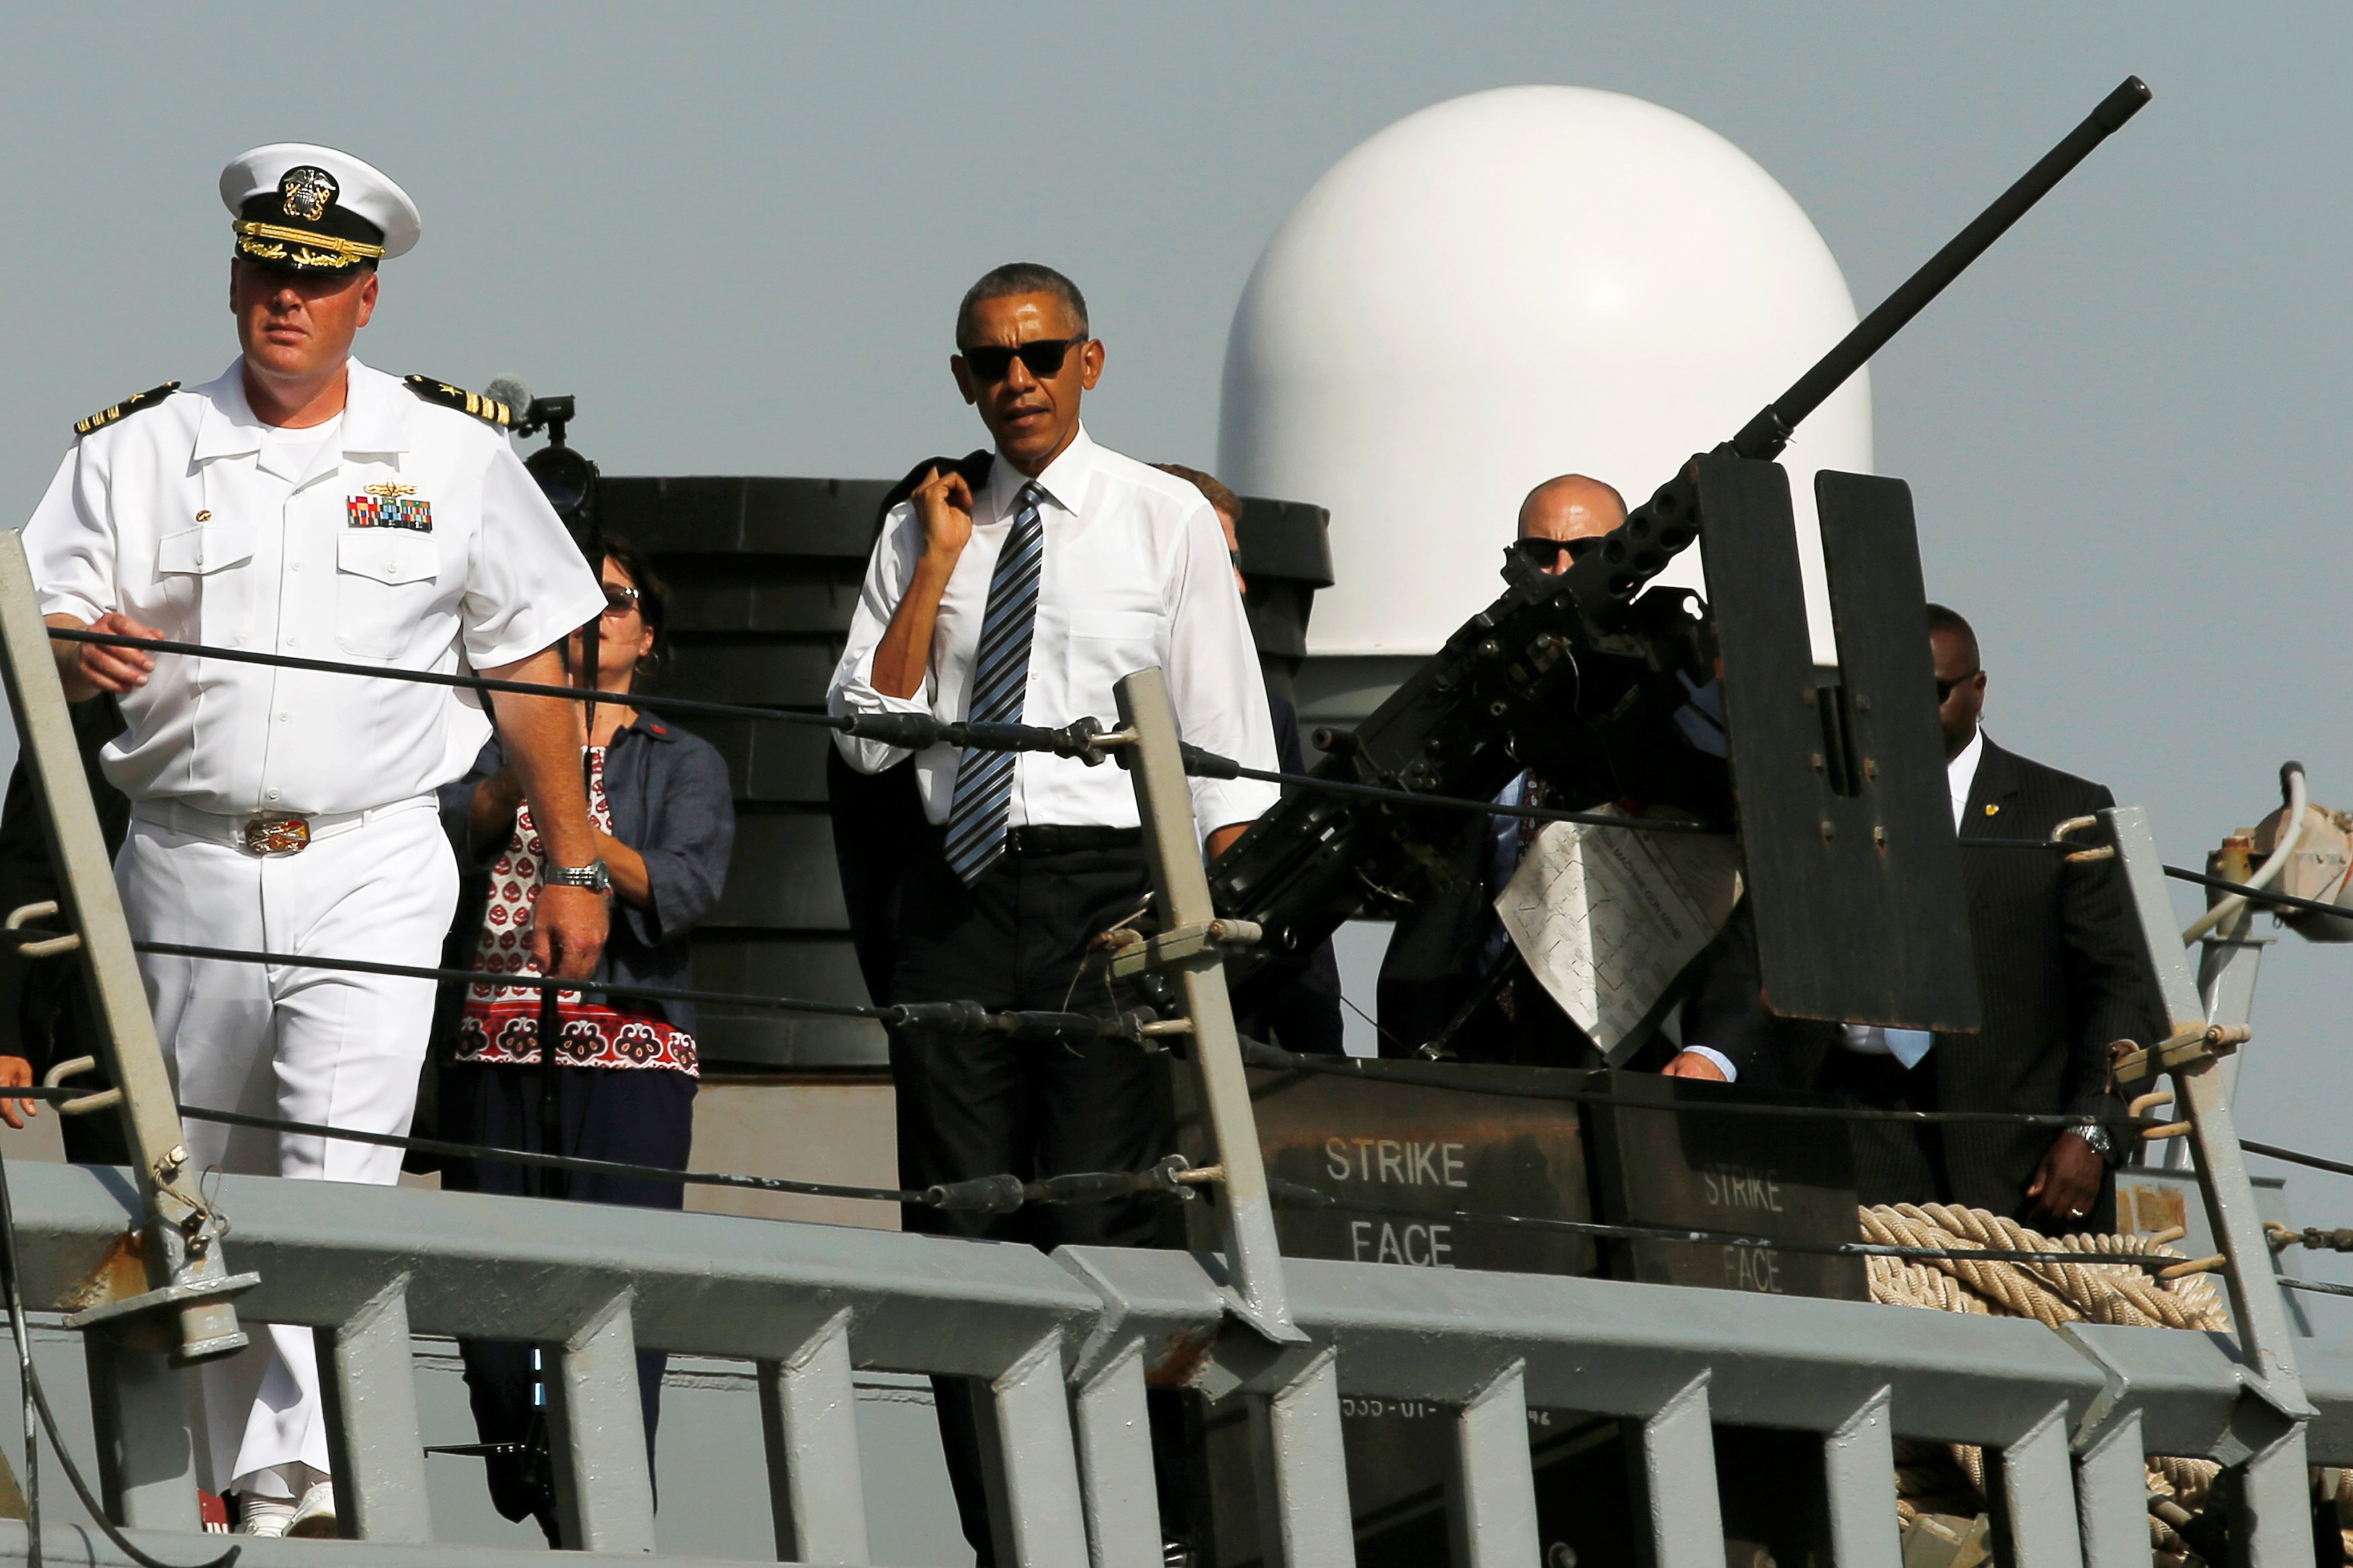 U.S. Navy Commander Russell Caldwell (L) gives U.S. President Barack Obama a tour of the U.S. Navy destroyer USS Ross at Naval Station Rota in Rota, Spain, July 10, 2016. REUTERS/Jonathan Ernst